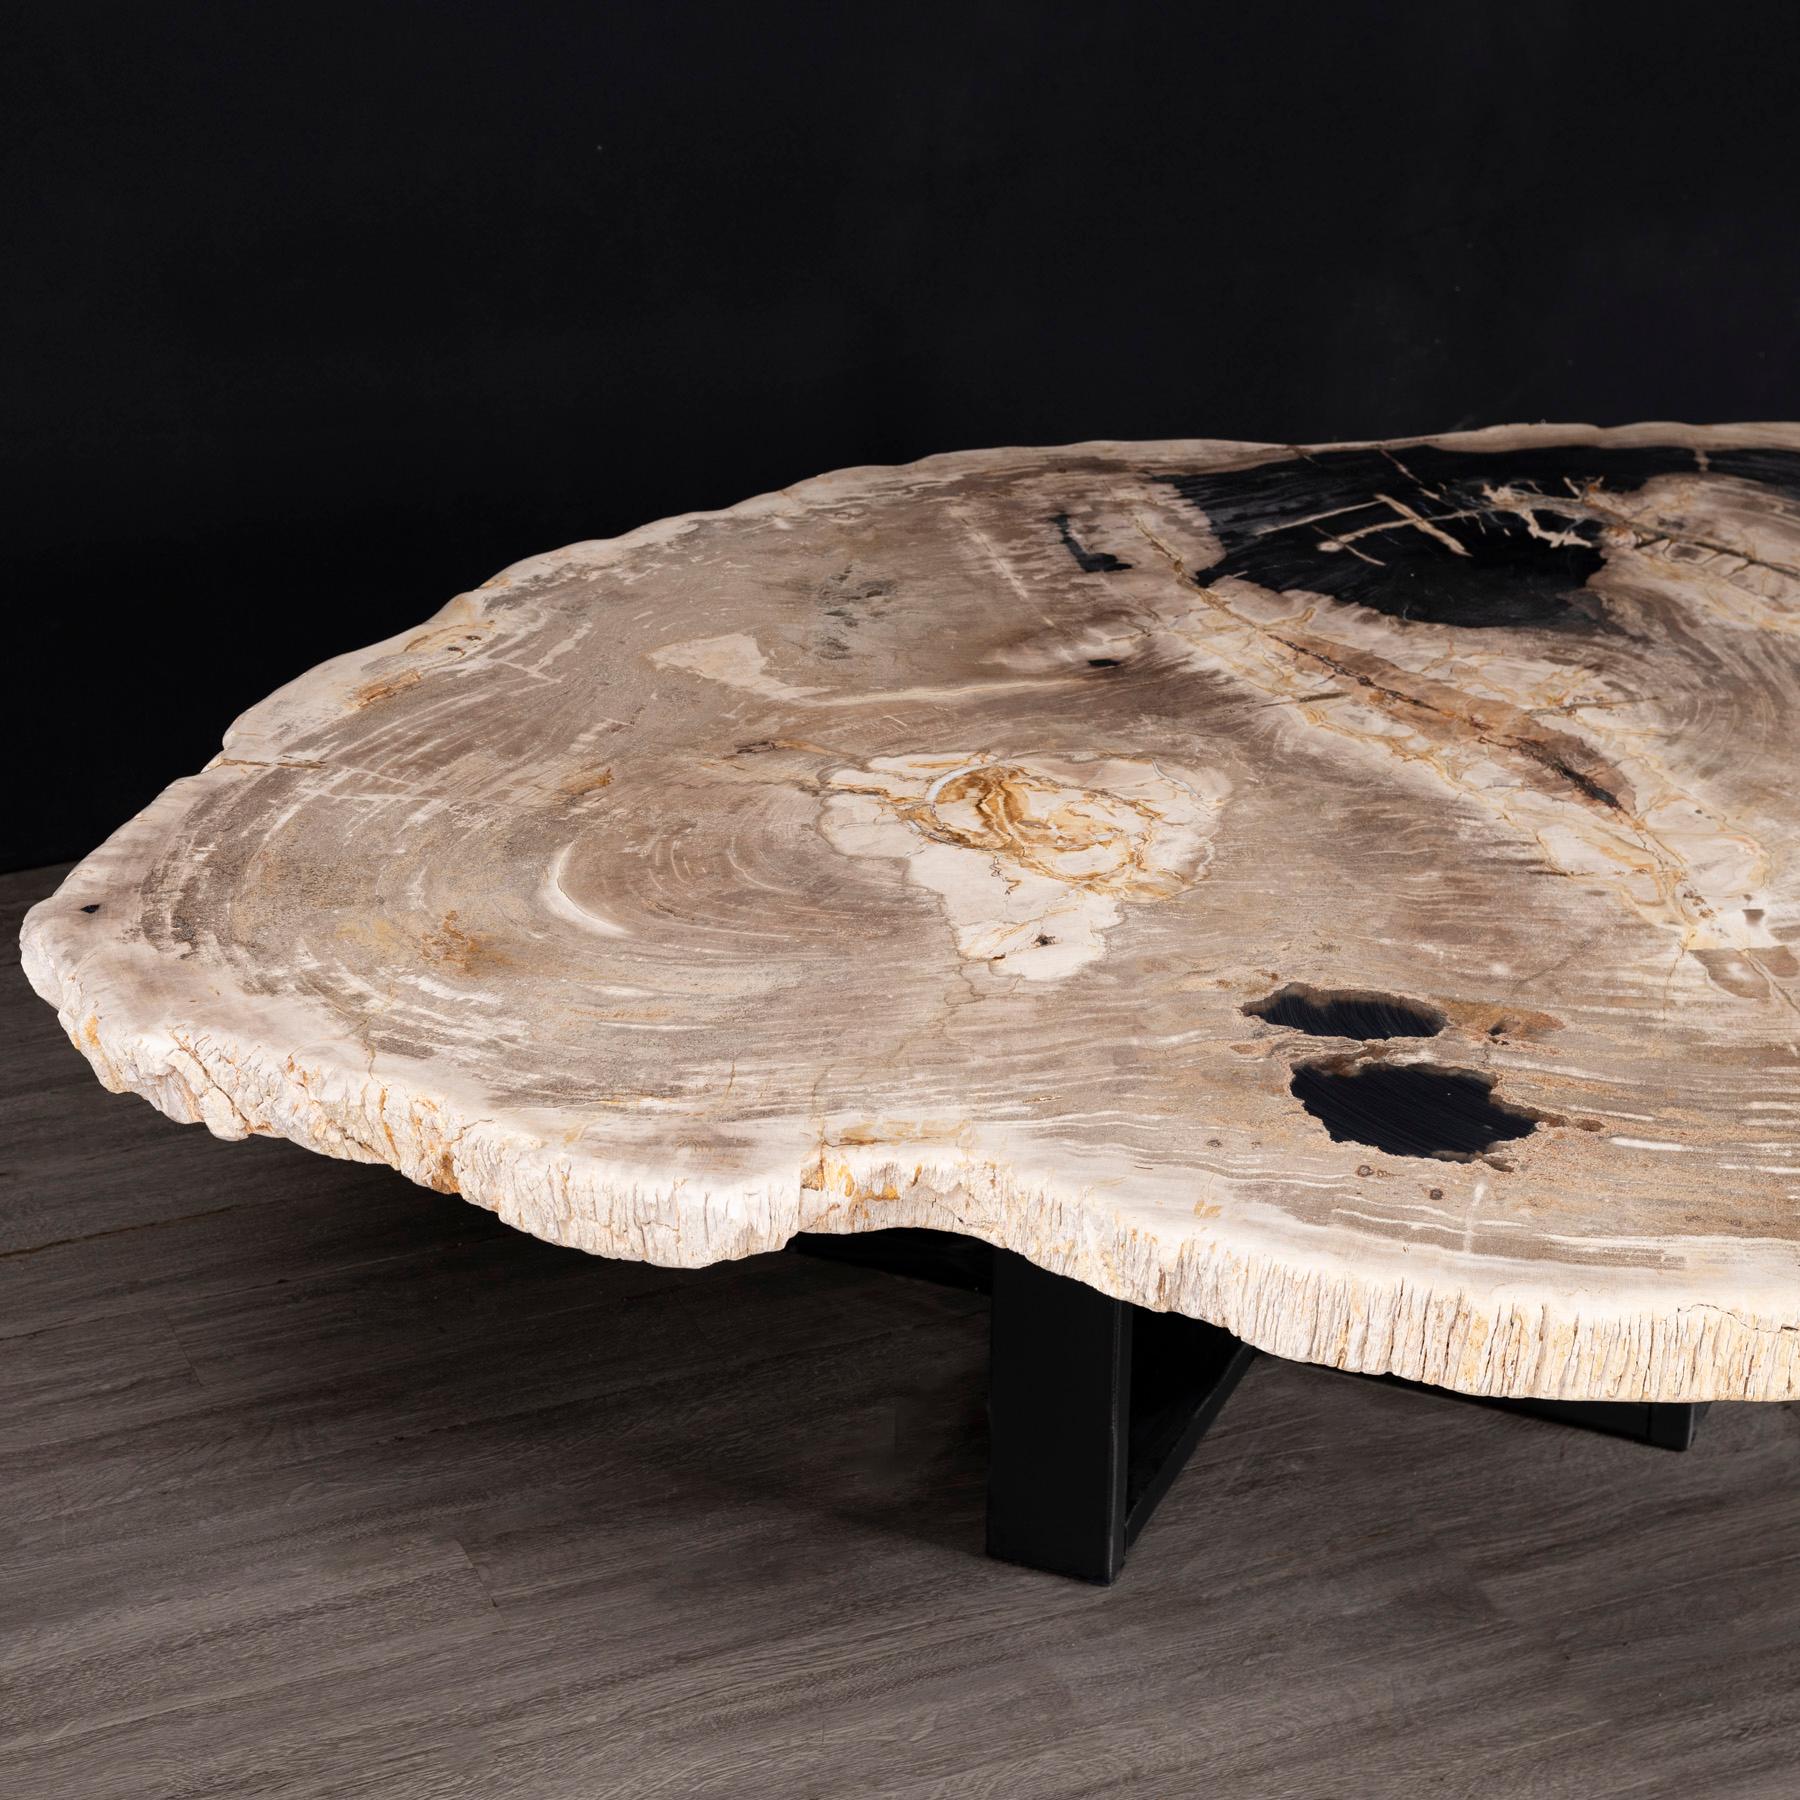 Mexican Center or Coffee Table, Natural Shape, Petrified Wood with Metal Base